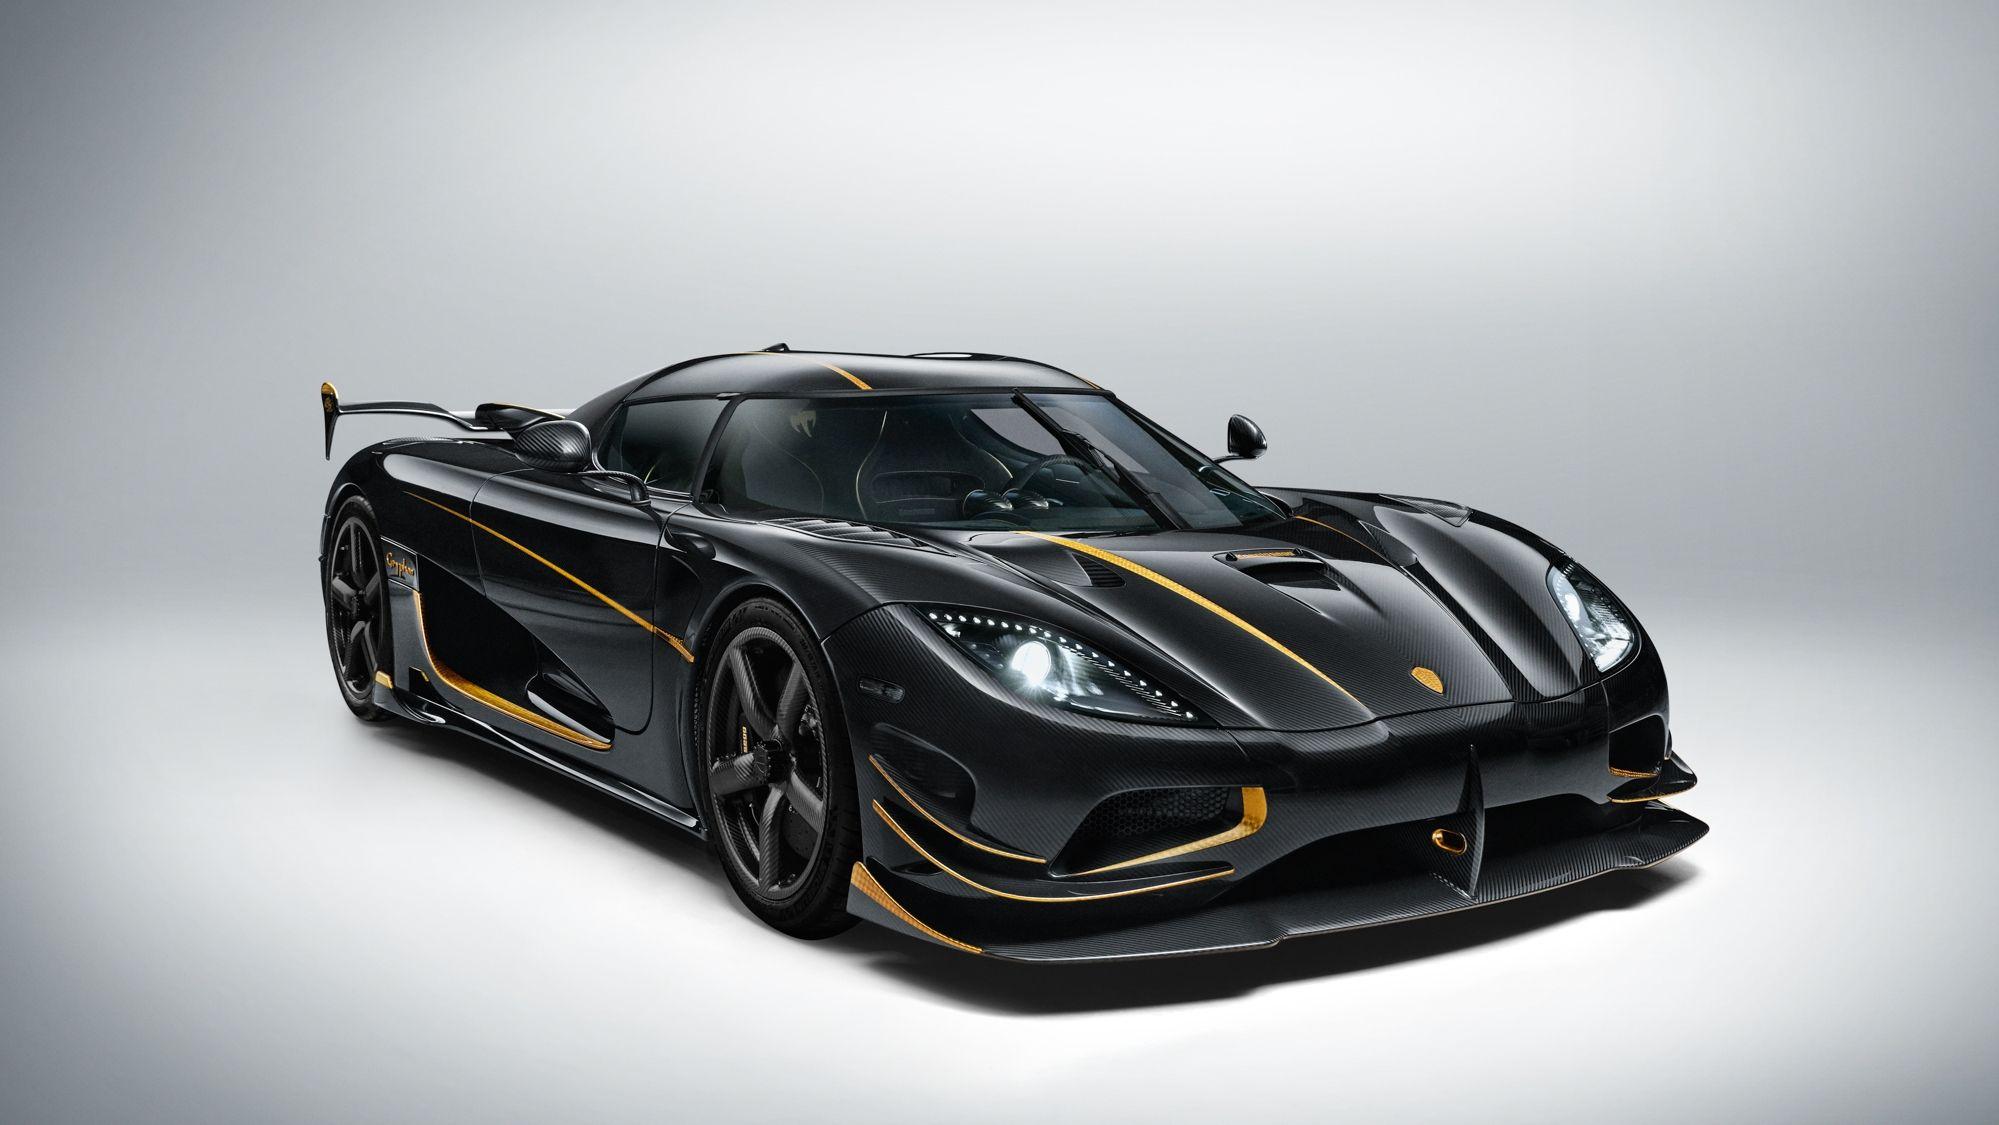 Koenigsegg Agera RS ‘Gryphon’ Pictures, Photos, Wallpapers